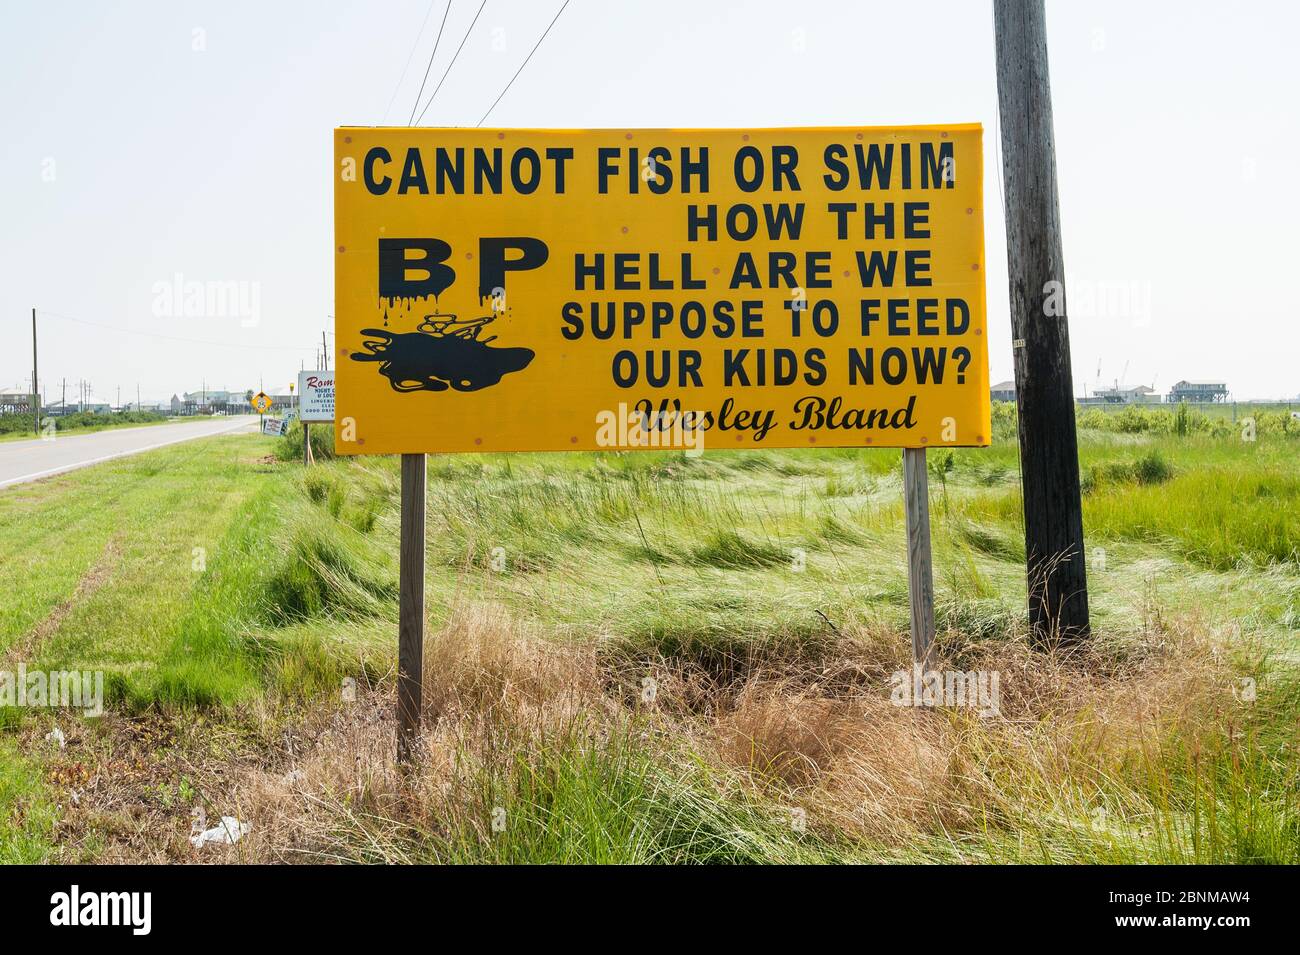 Protest sign by road during Deepwater Horizon oil spill, Louisiana, Gulf of Mexico, USA, August 2010 Stock Photo